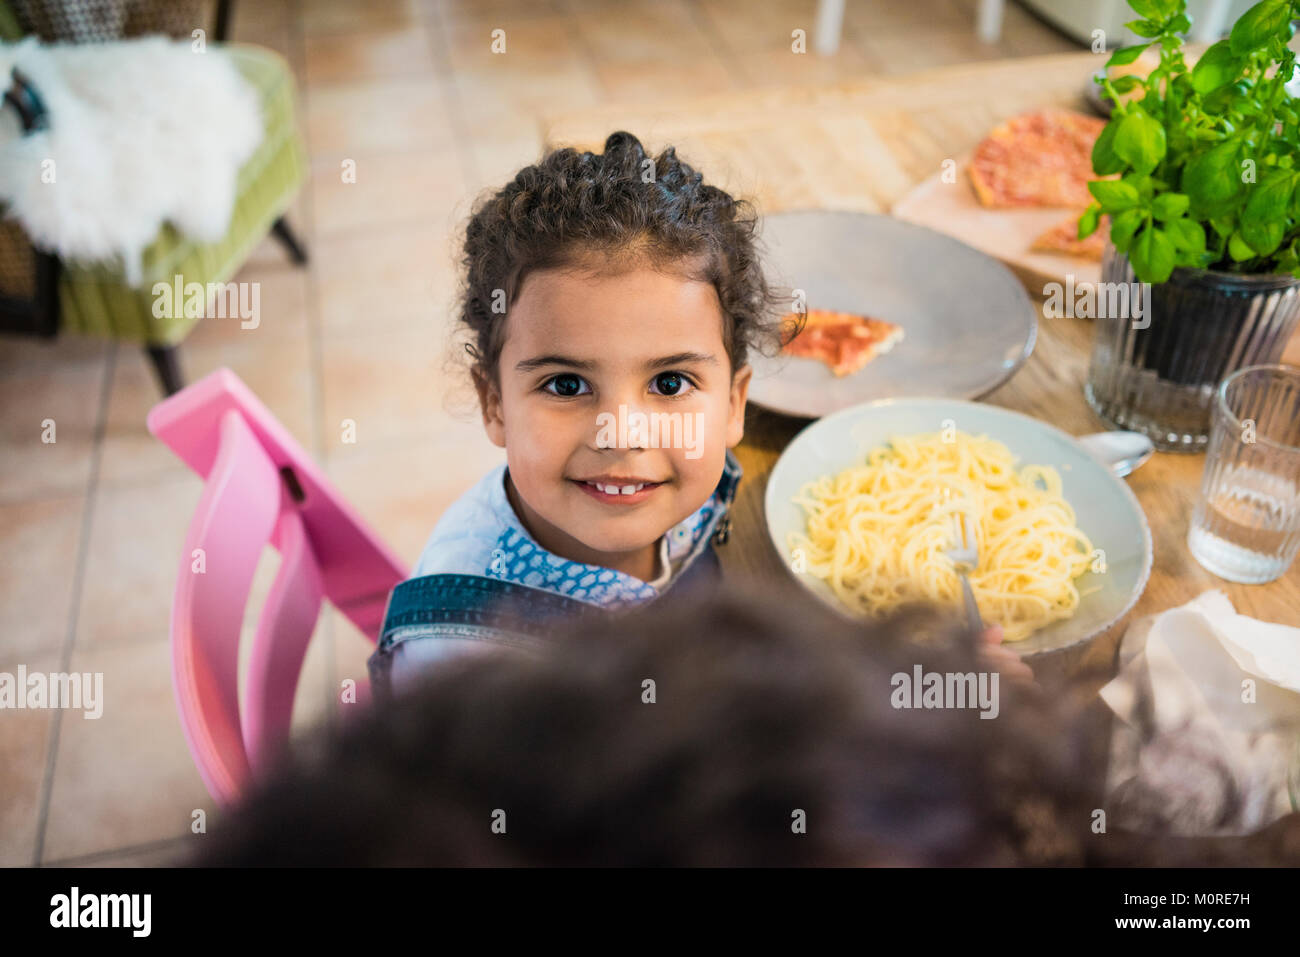 Portrait of a cheeky little girl eating spaghetti Stock Photo